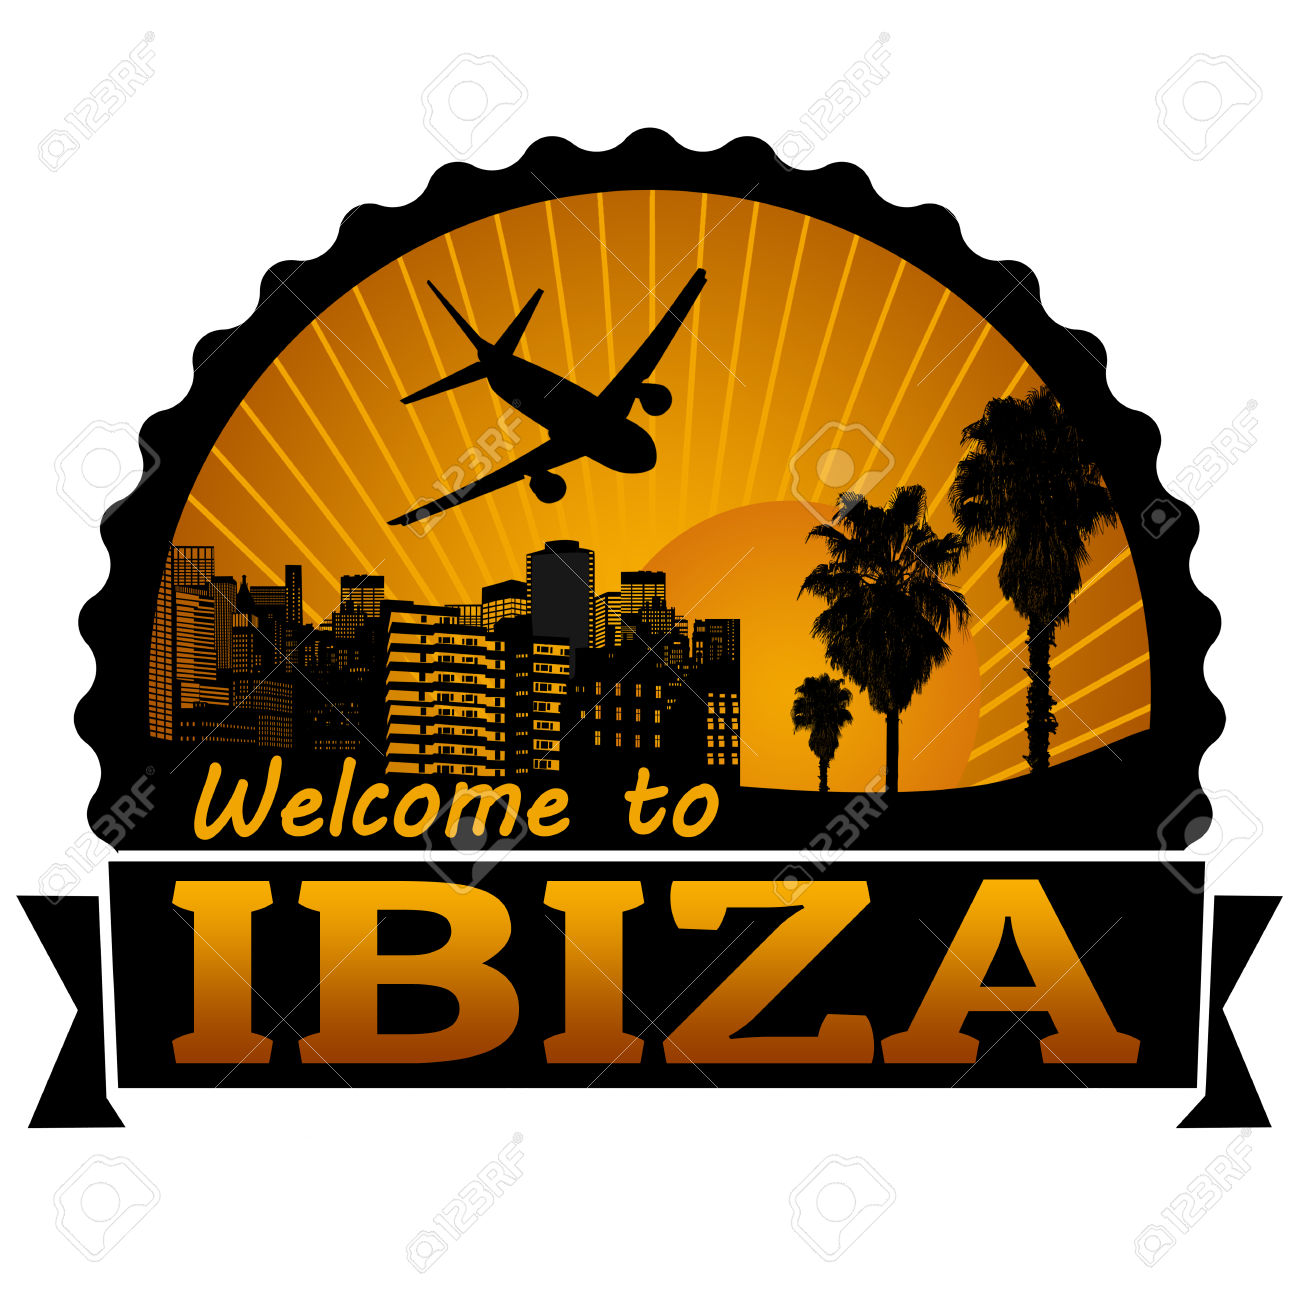 Welcome To Ibiza Travel Label Or Stamp On White, Vector.